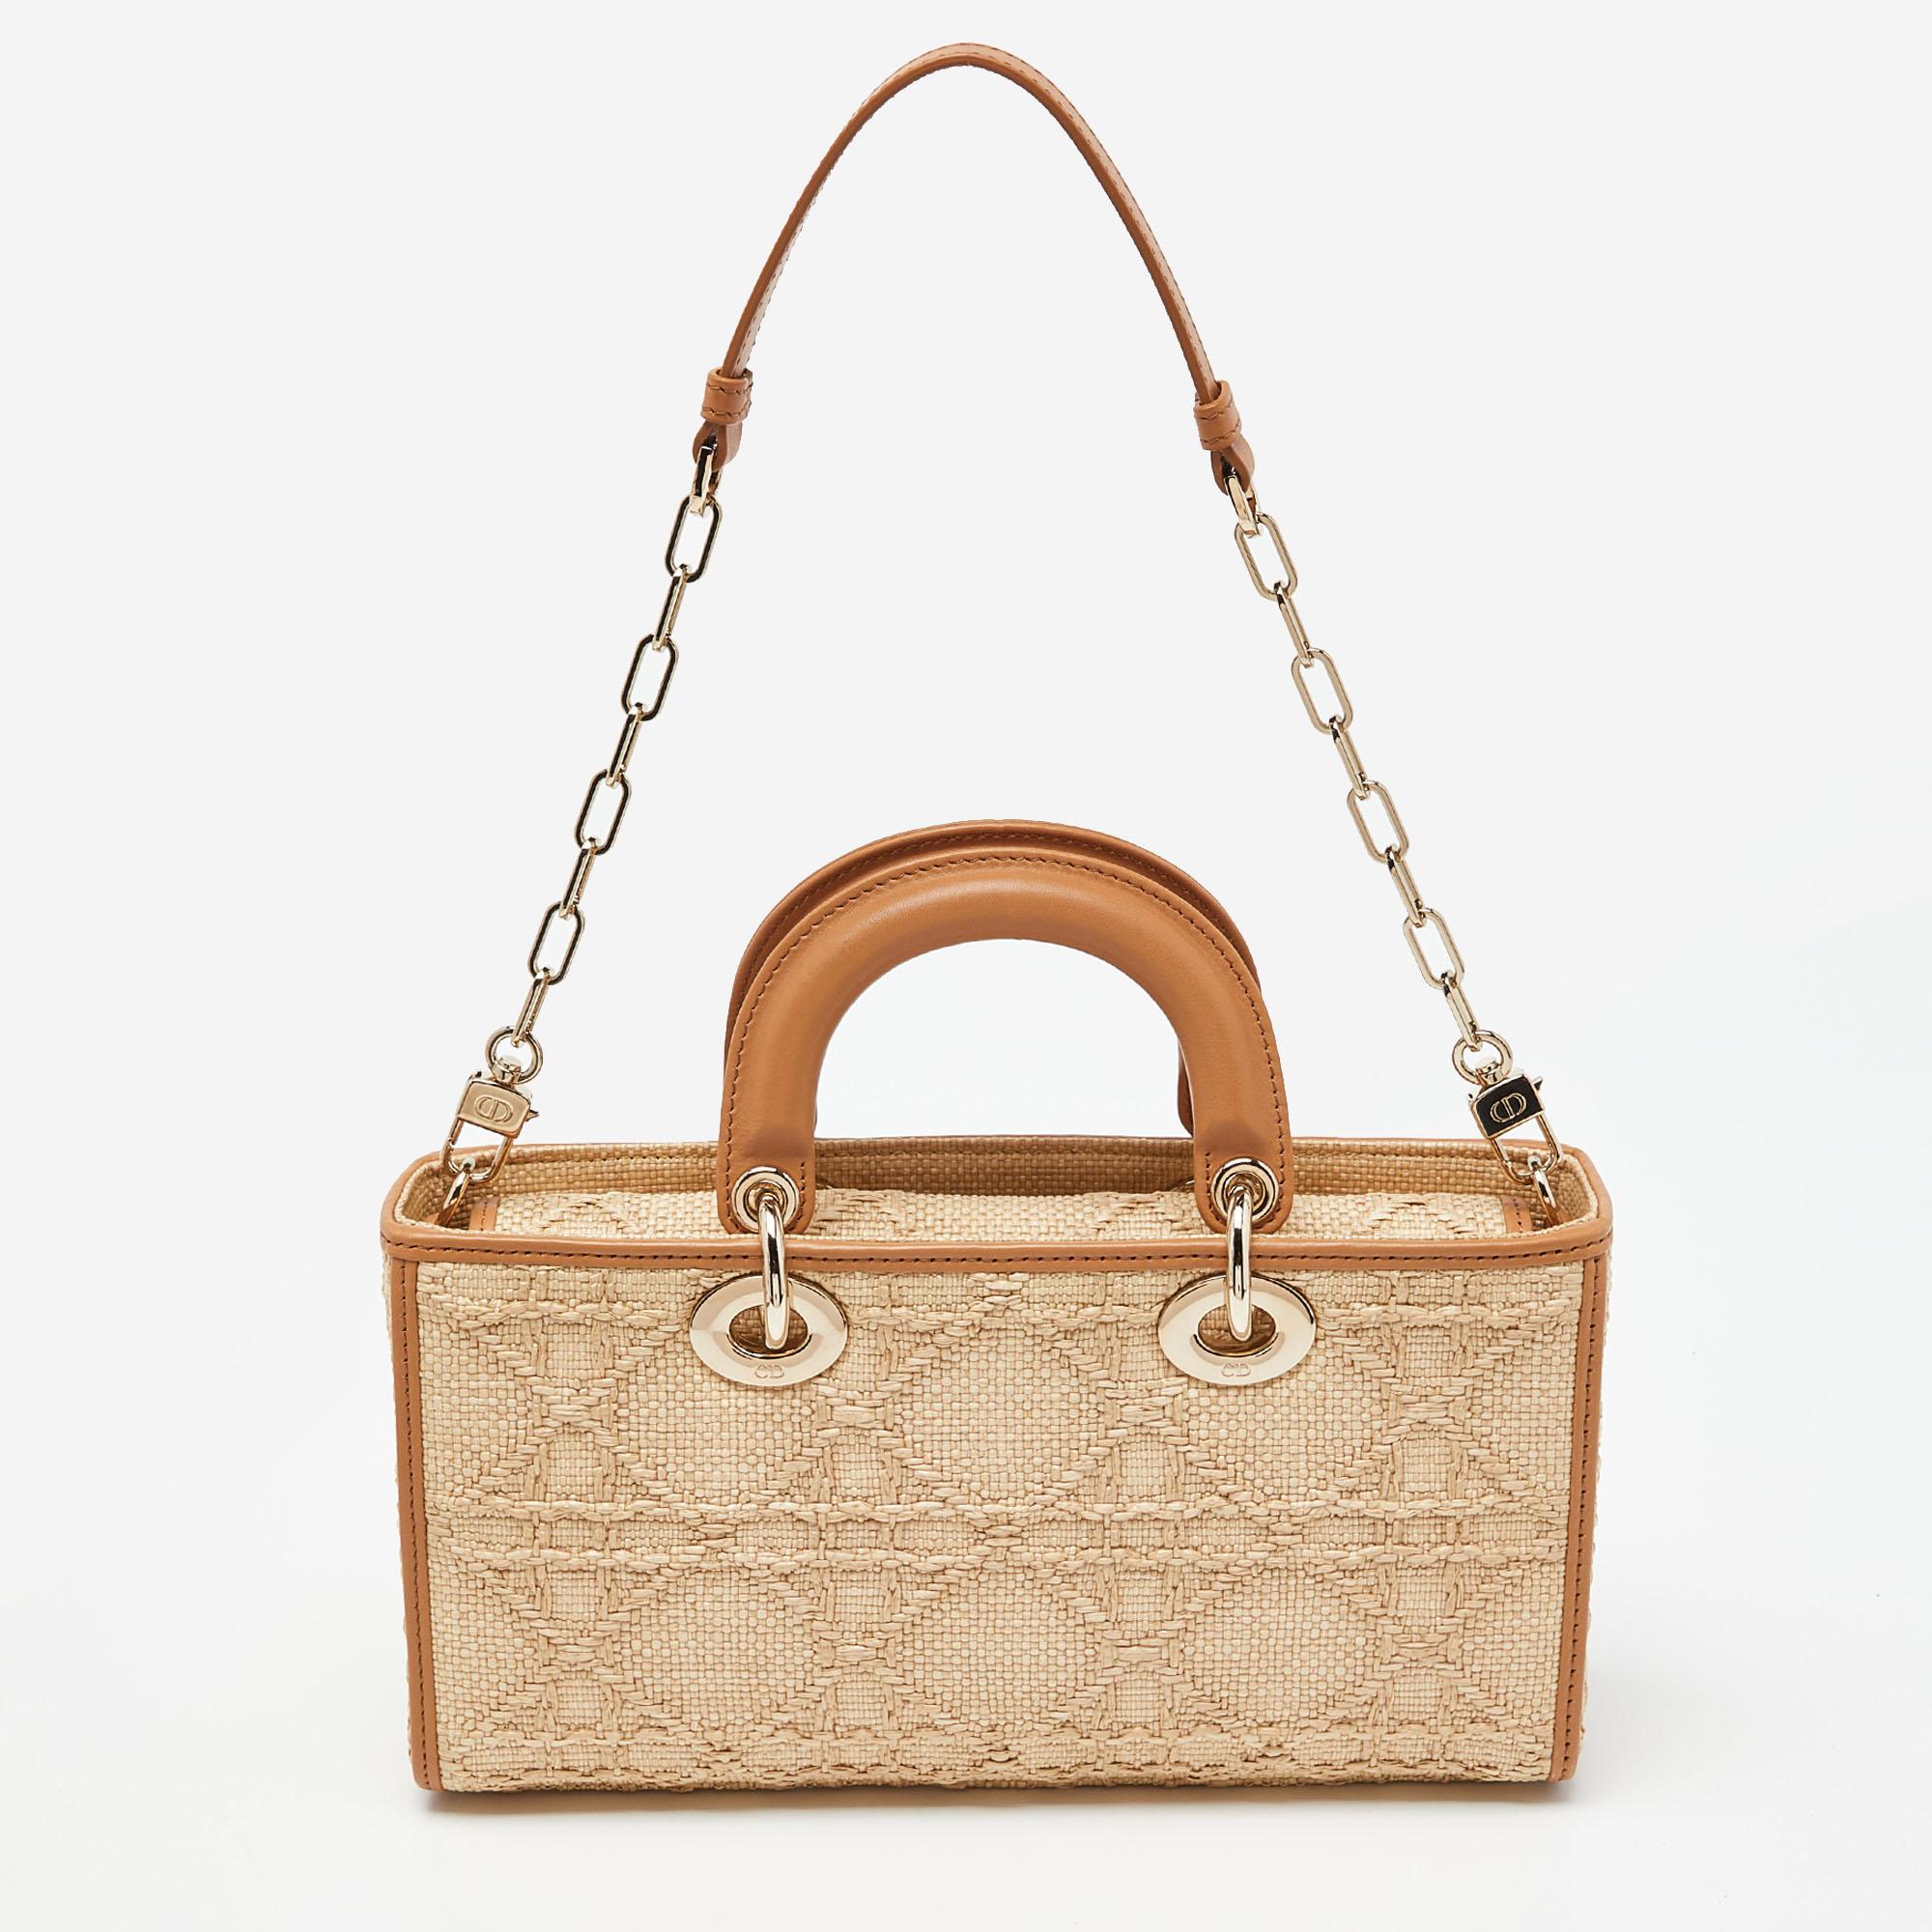 Get style and carry your essentials with ease using this Lady D-Joy bag by Dior. It has been crafted from raffia employing the signature Cannage motif, and is enhanced with leather trims & gold-tone hardware. The bag has two handles and a